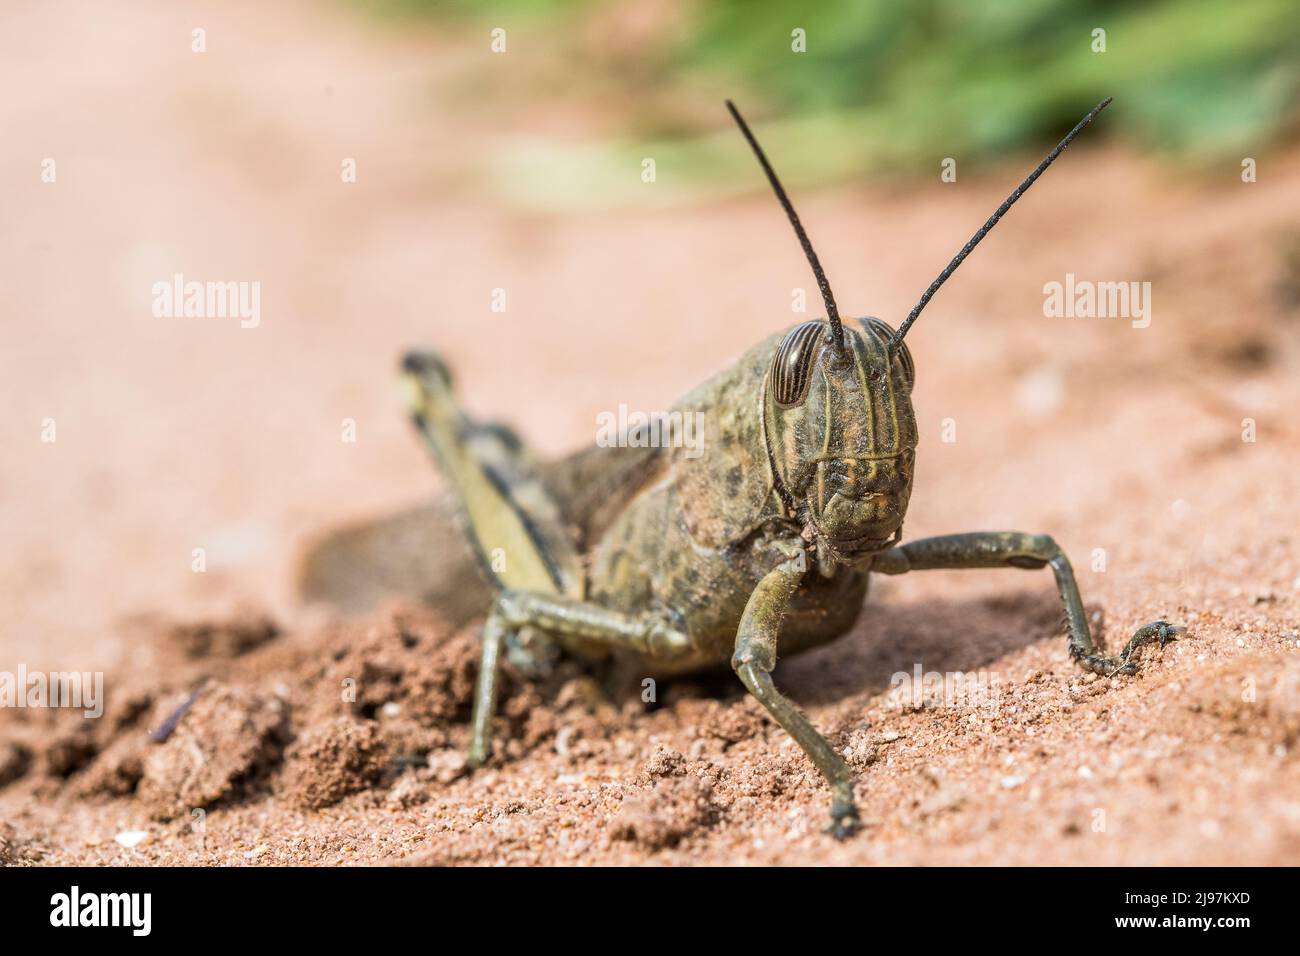 Anacridium aegyptium, the Egyptian grasshopper or Egyptian locust, is a species of insect belonging to the subfamily Cyrtacanthacridinae, female. Stock Photo